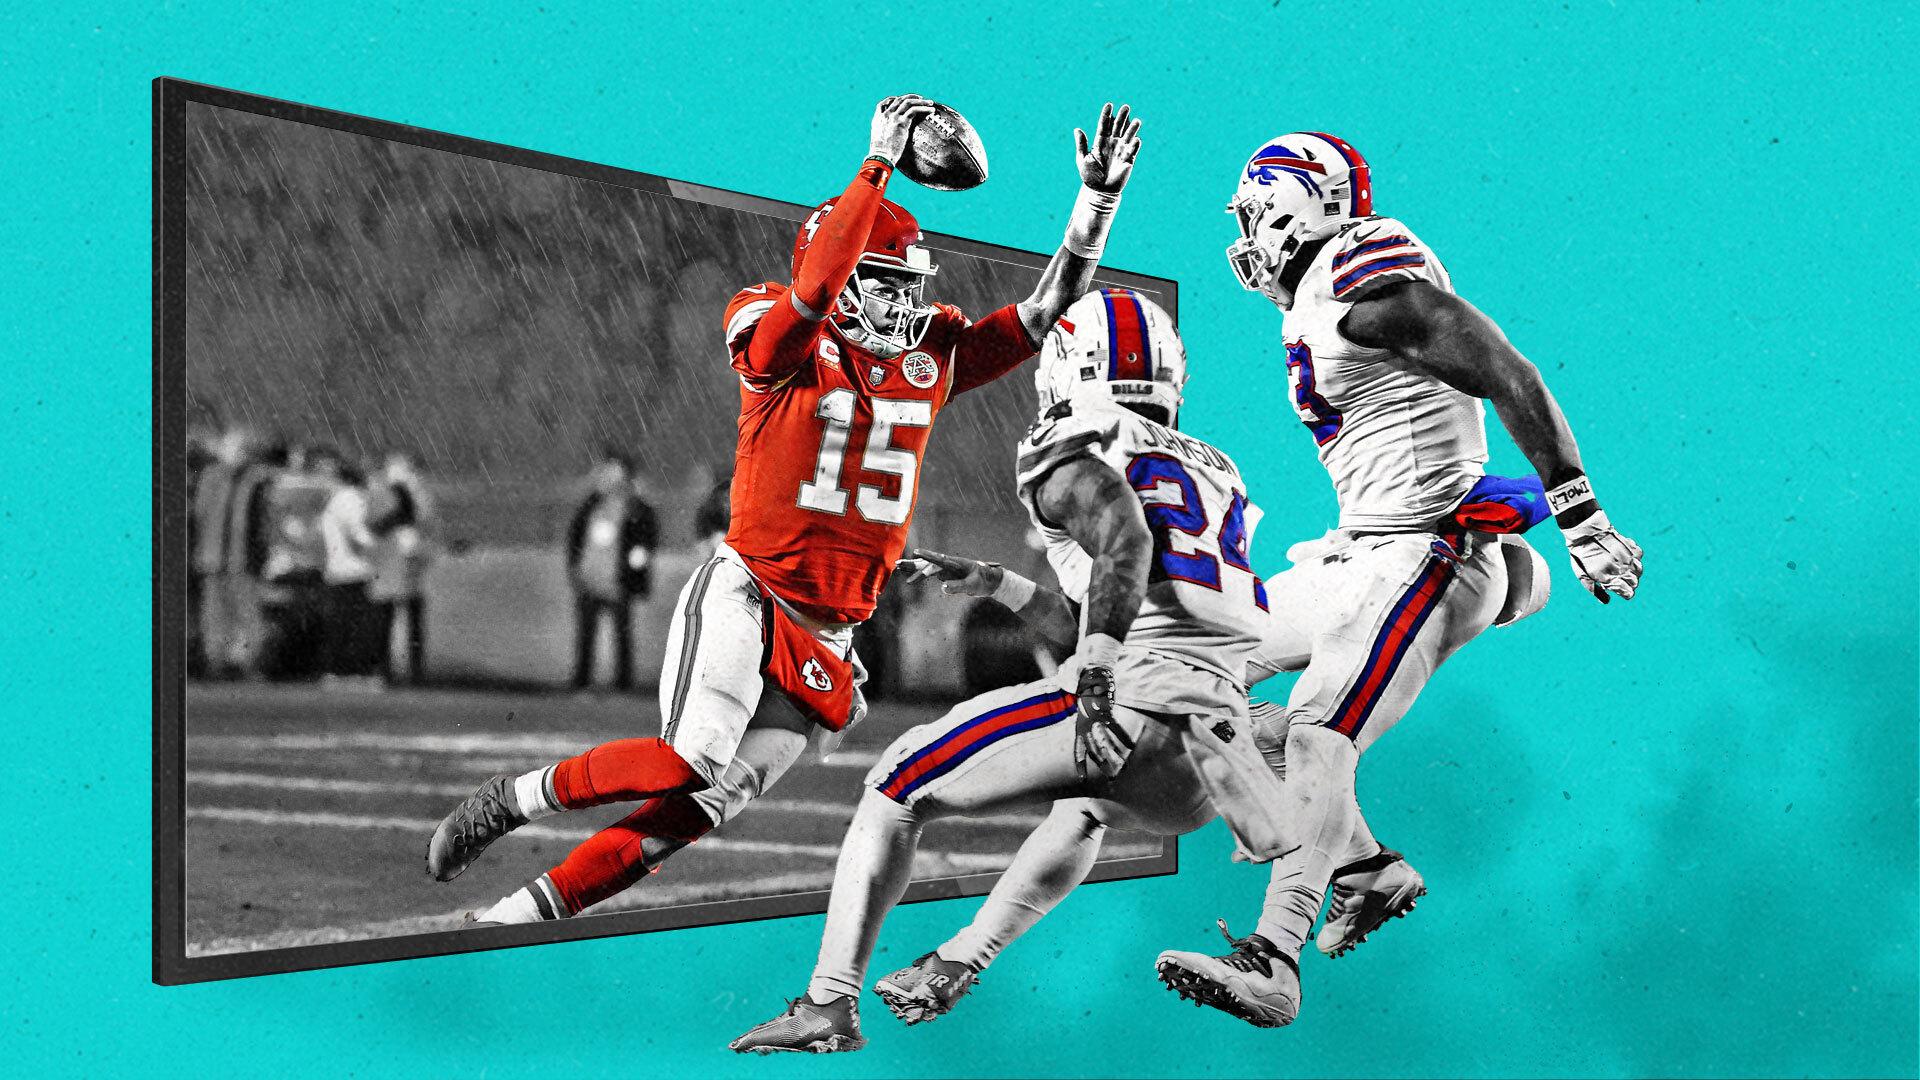 ‘History was made:’ Why the Bills-Chiefs playoff has marketers all fired up